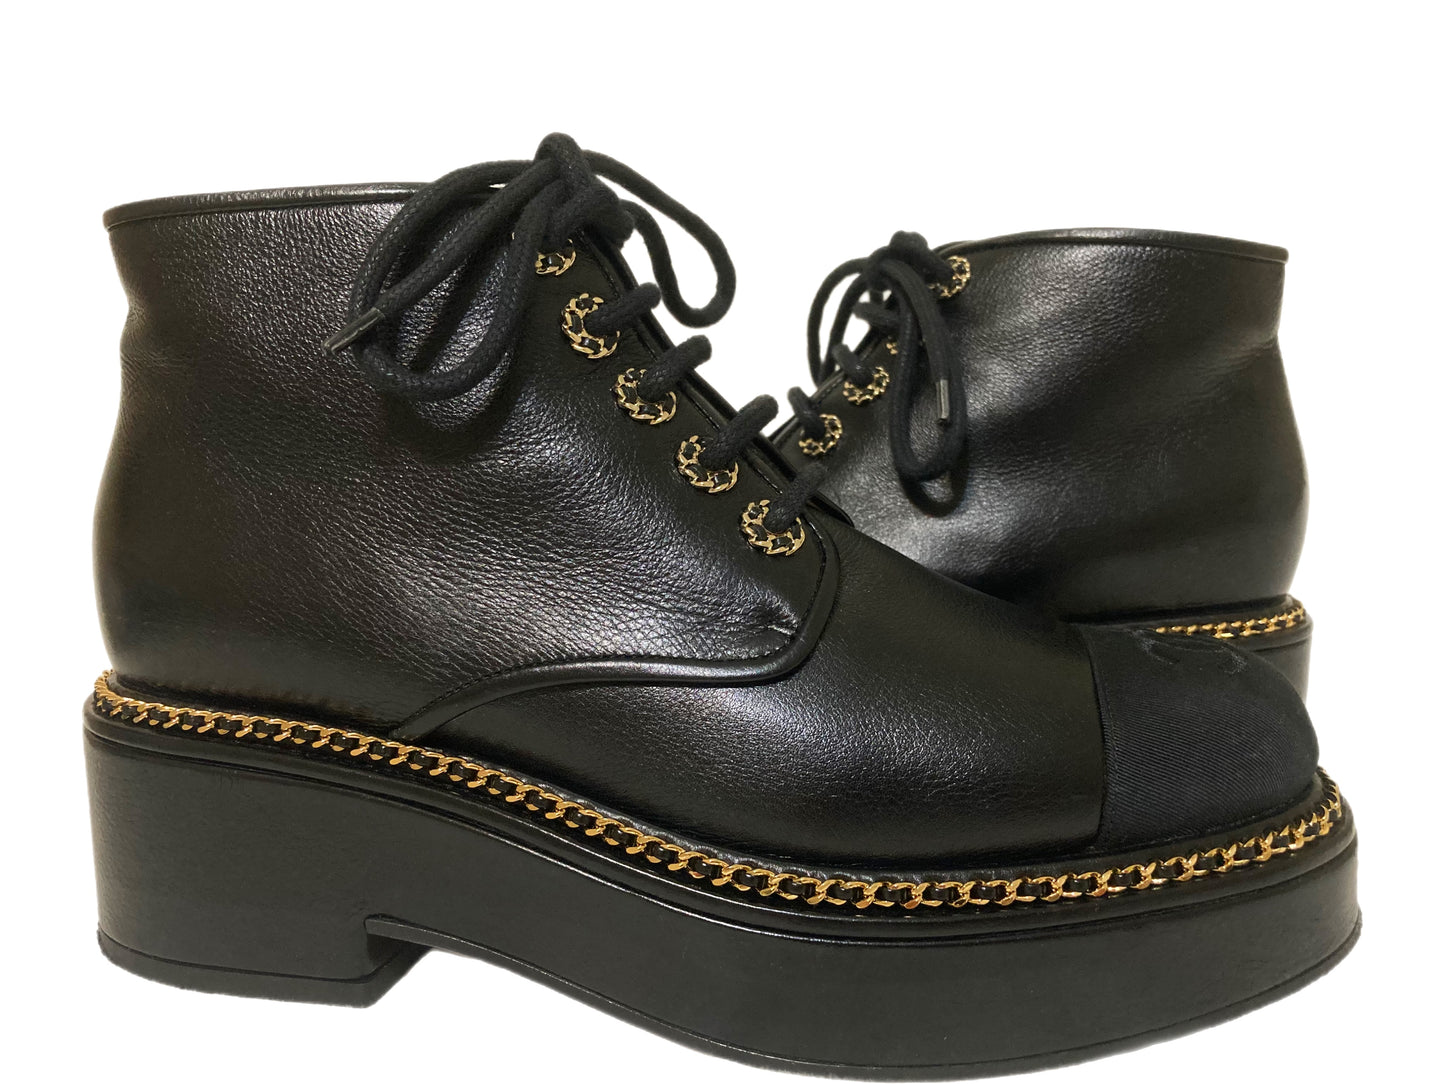 CHANEL Leather Lace Up Boots Size 38.5 Black